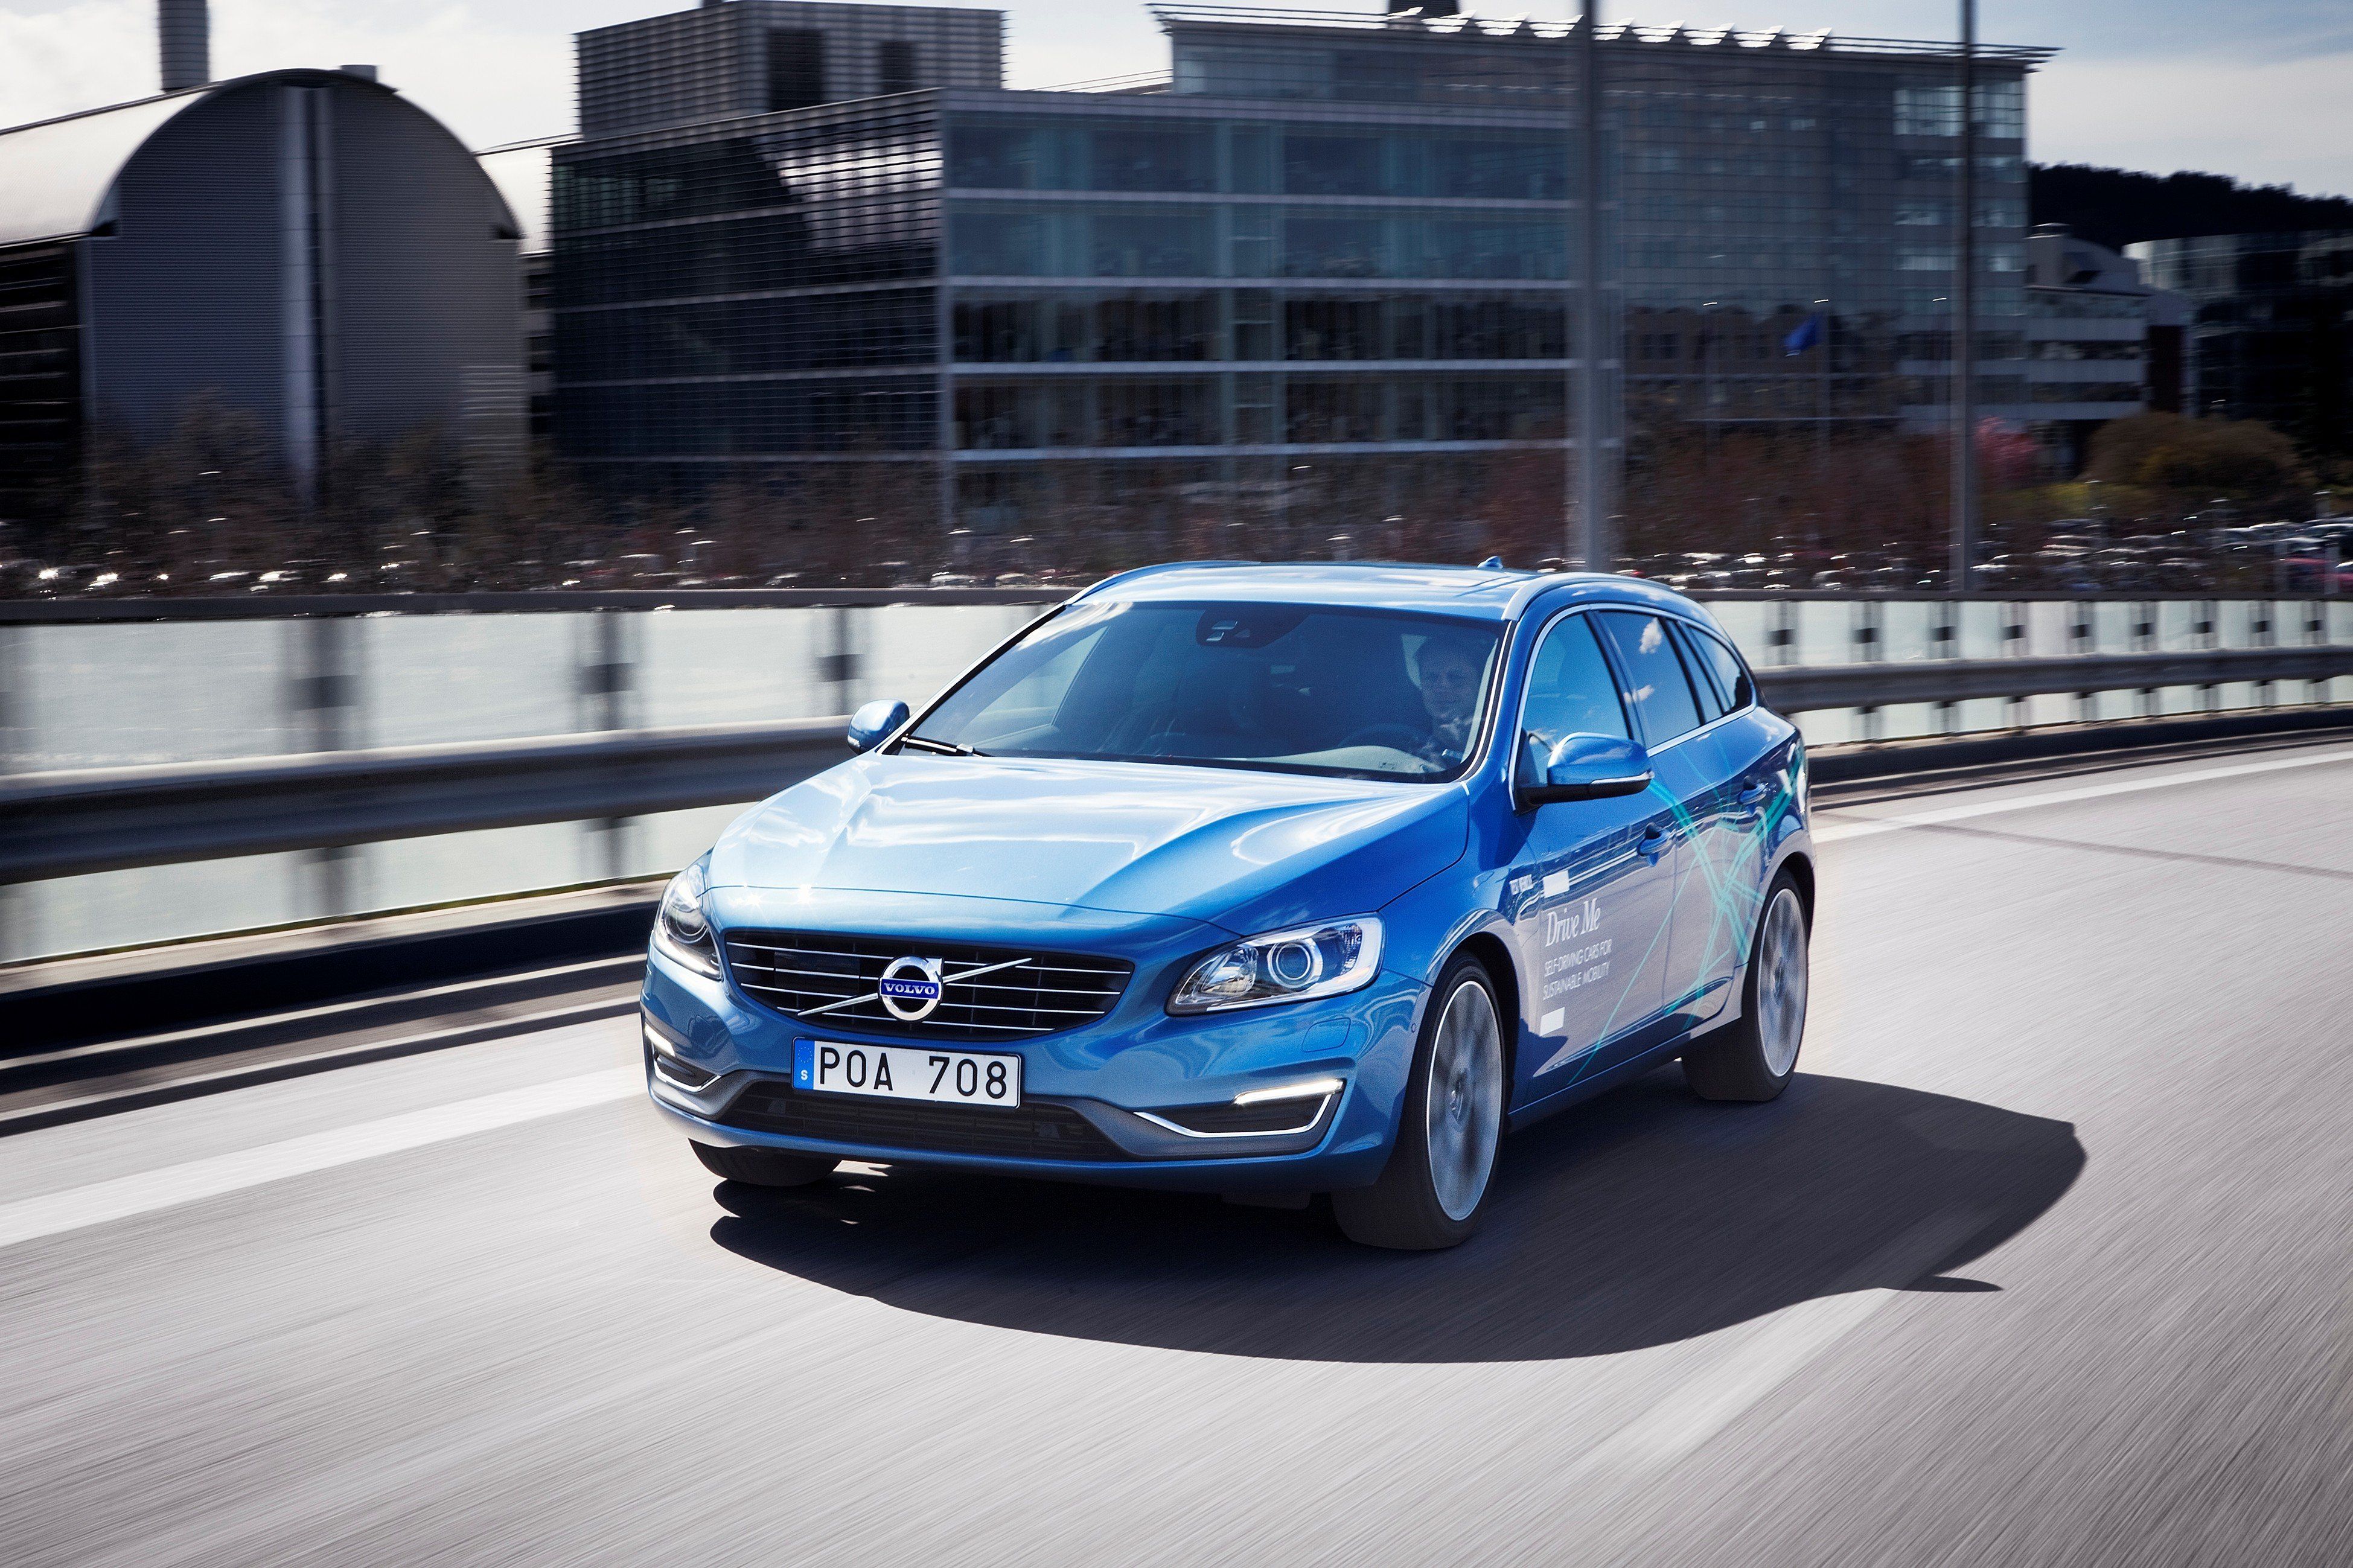 volvo-cars-and-autoliv-partner-up-for-self-driving-car-trials-that-are-set-for-2017-100507_1.jpg